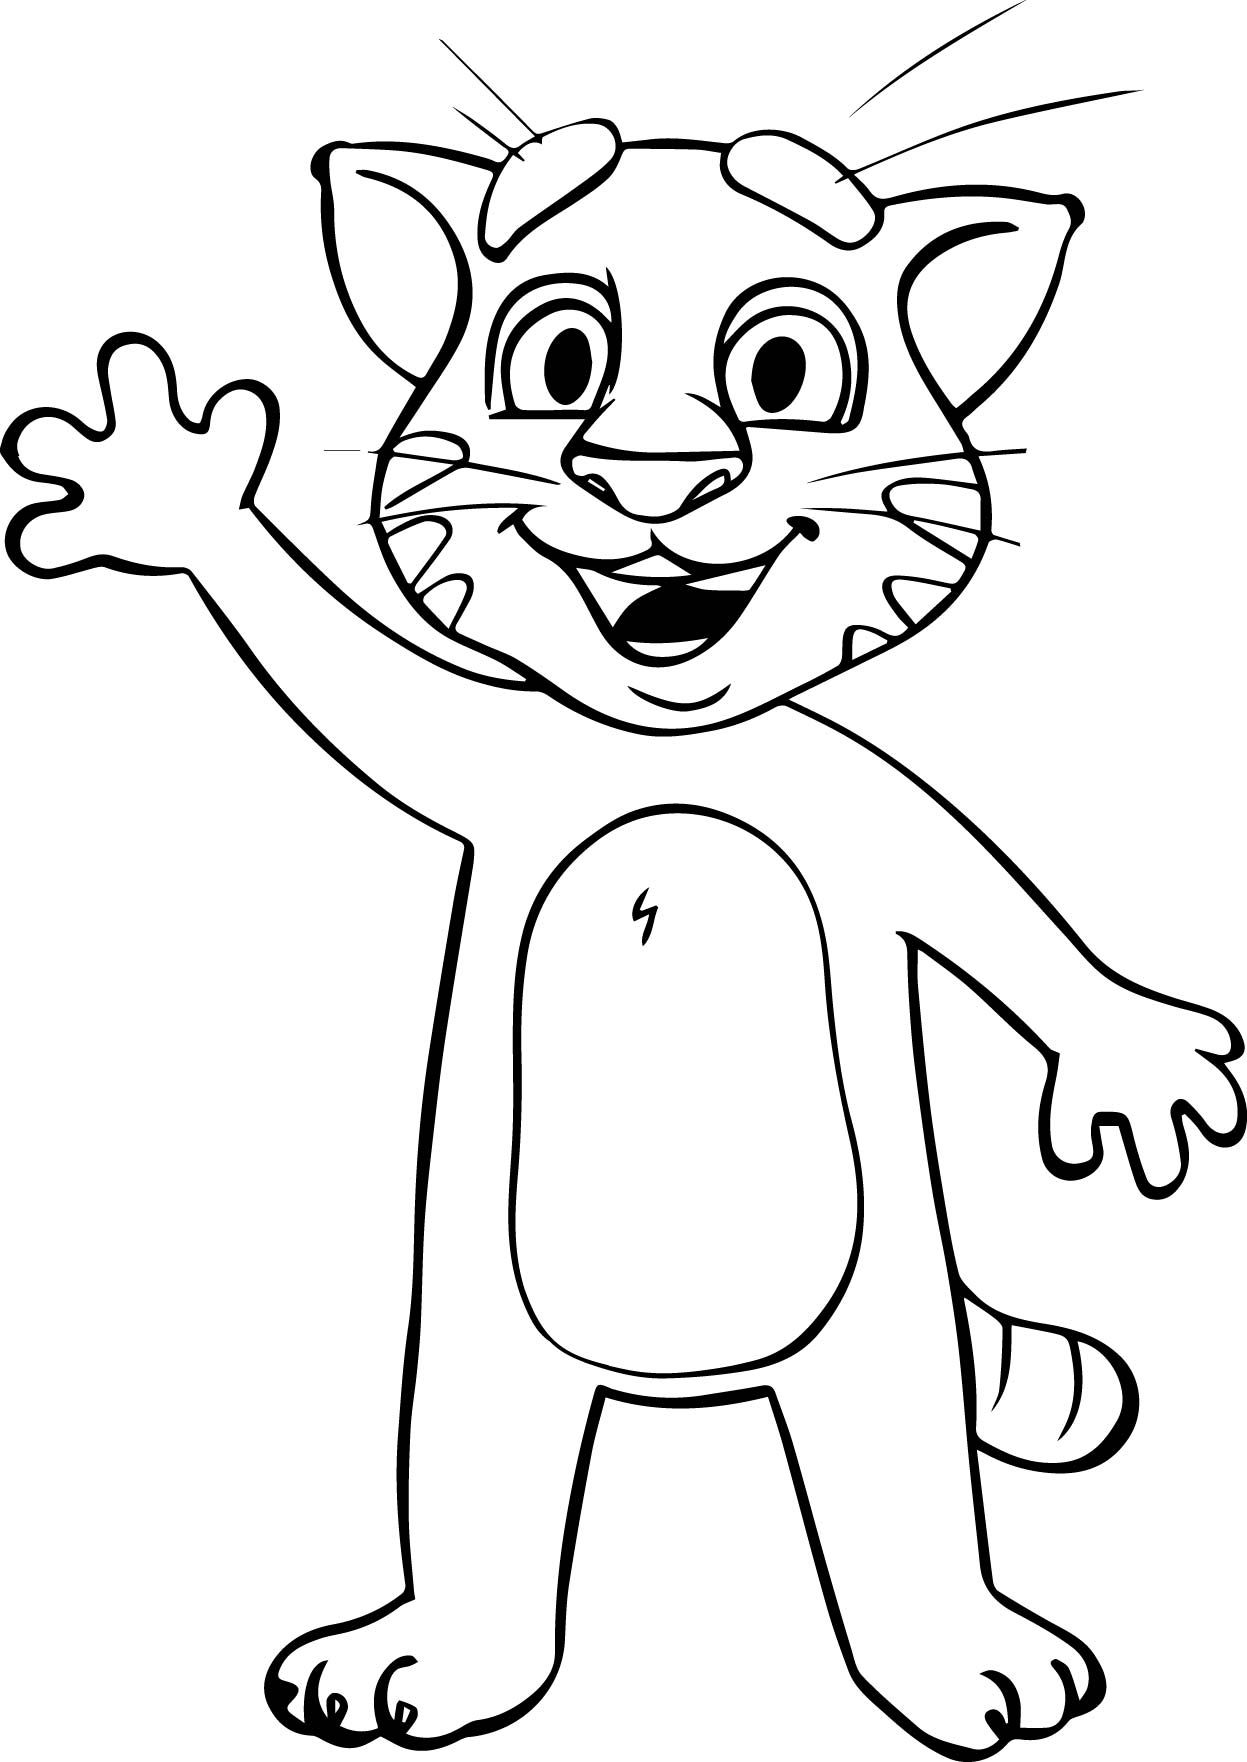 8 Best Talking tom images | Coloring books, Coloring pages ...